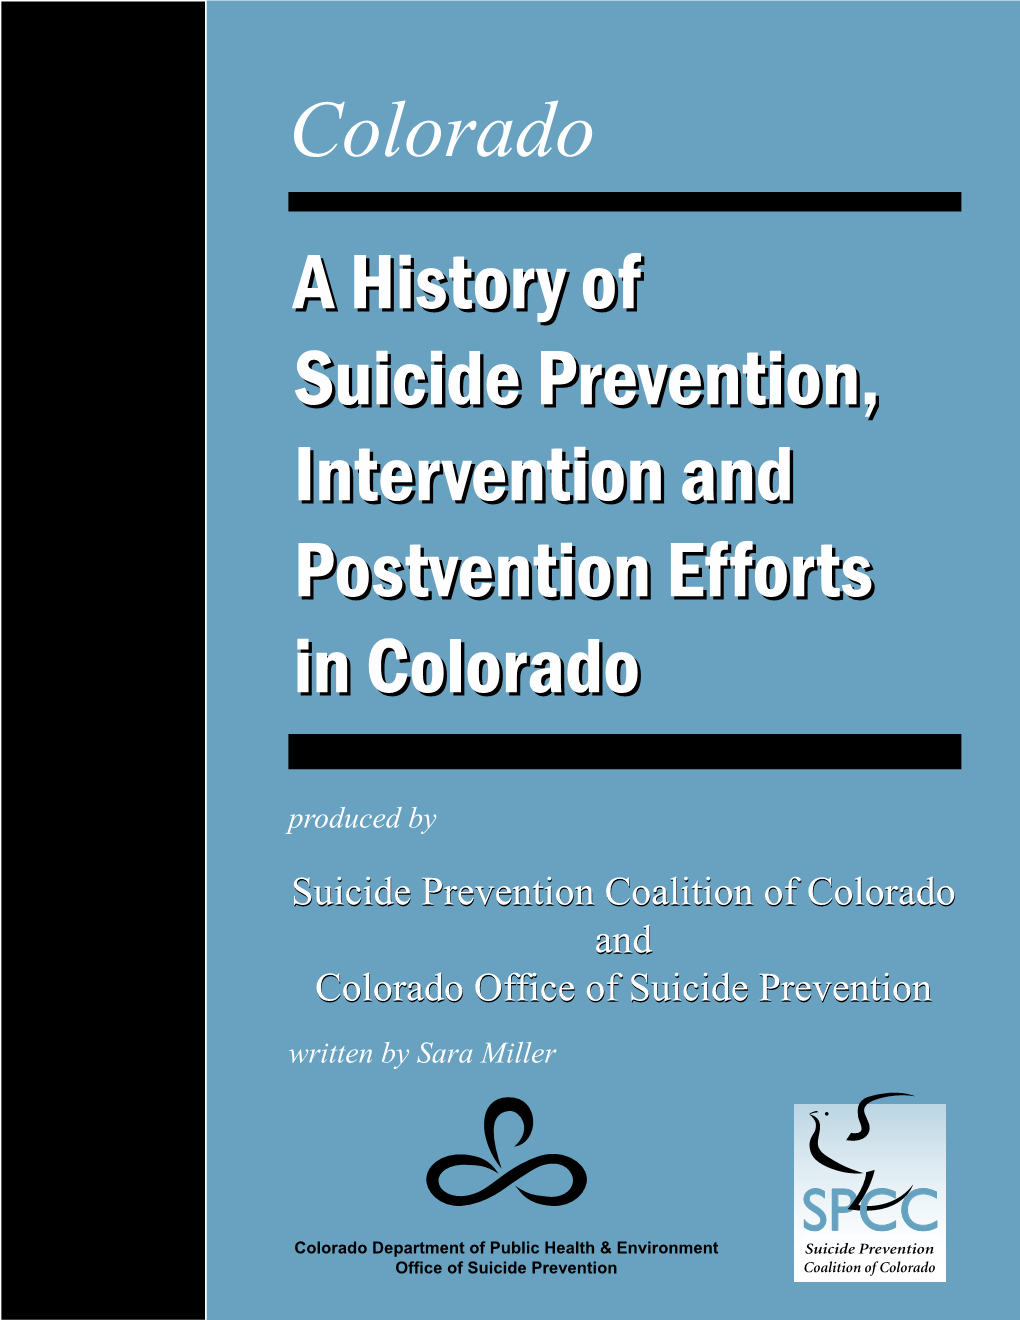 A History of Suicide Prevention, Intervention and Postvention Efforts in Colorado